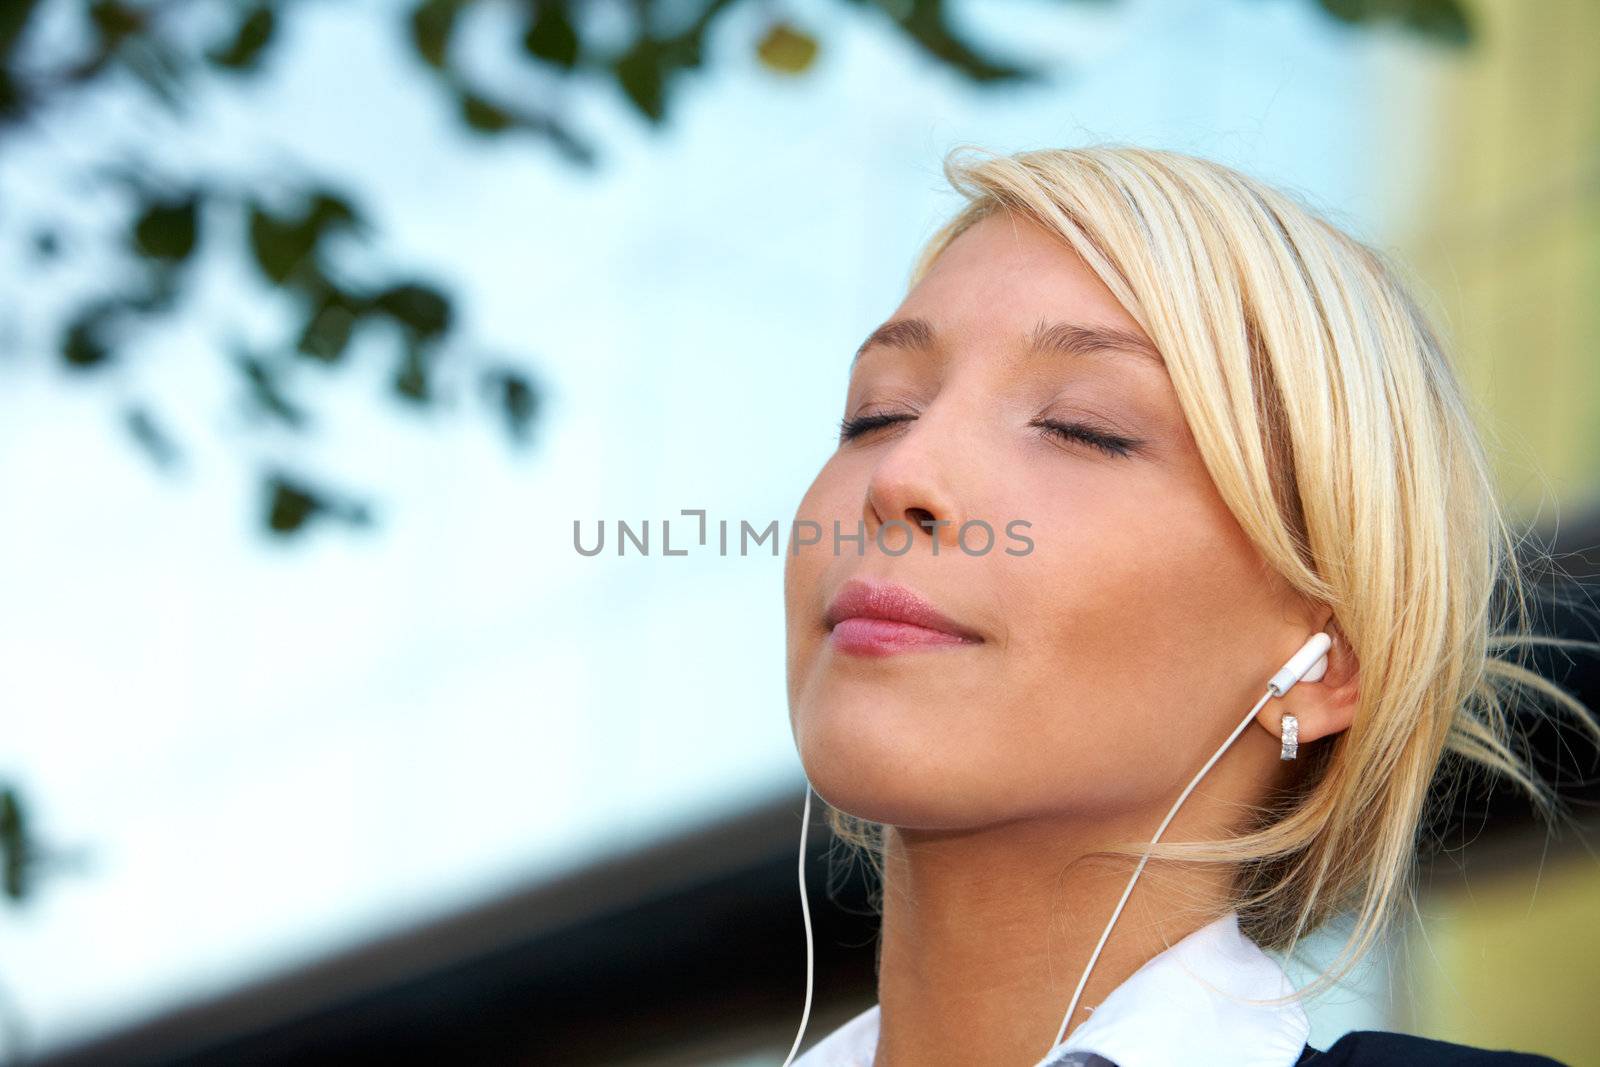 Young businesswoman wearing earphones in city, eyes closed